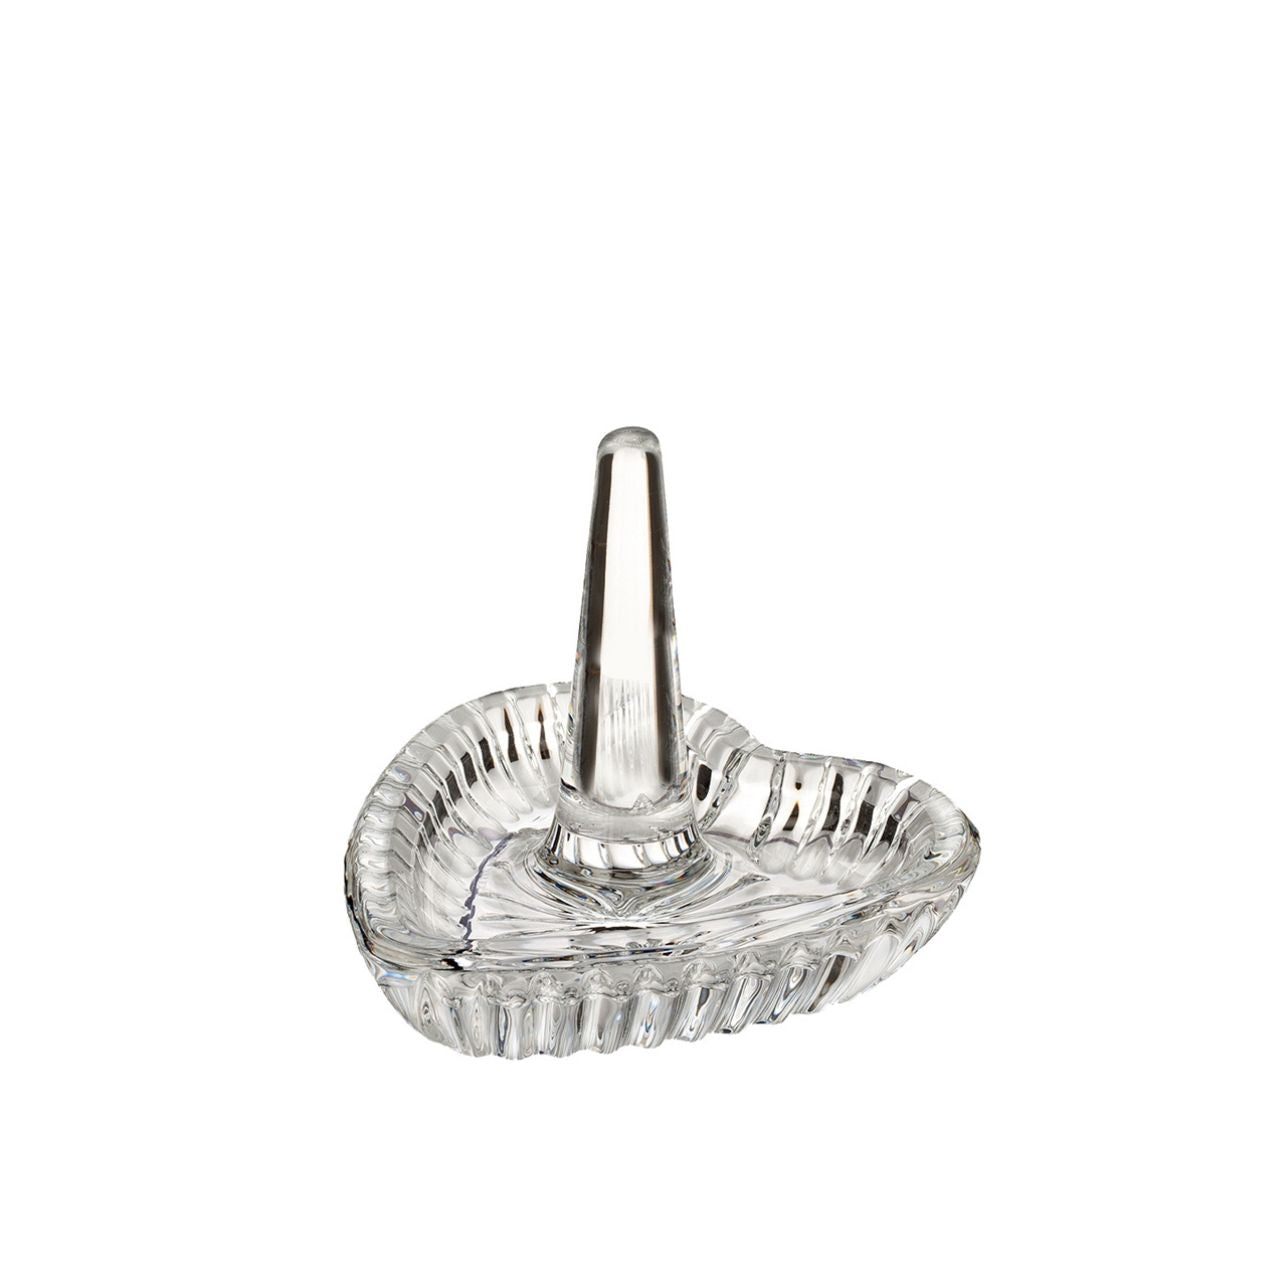 Waterford Crystal Heart Ring Holder  Keep precious jewelry close to your heart. Radiating from the center, the clean vertical cut of Waterford's Heart Ring Holder creates a stunning focal point while keeping your rings safe and sound.